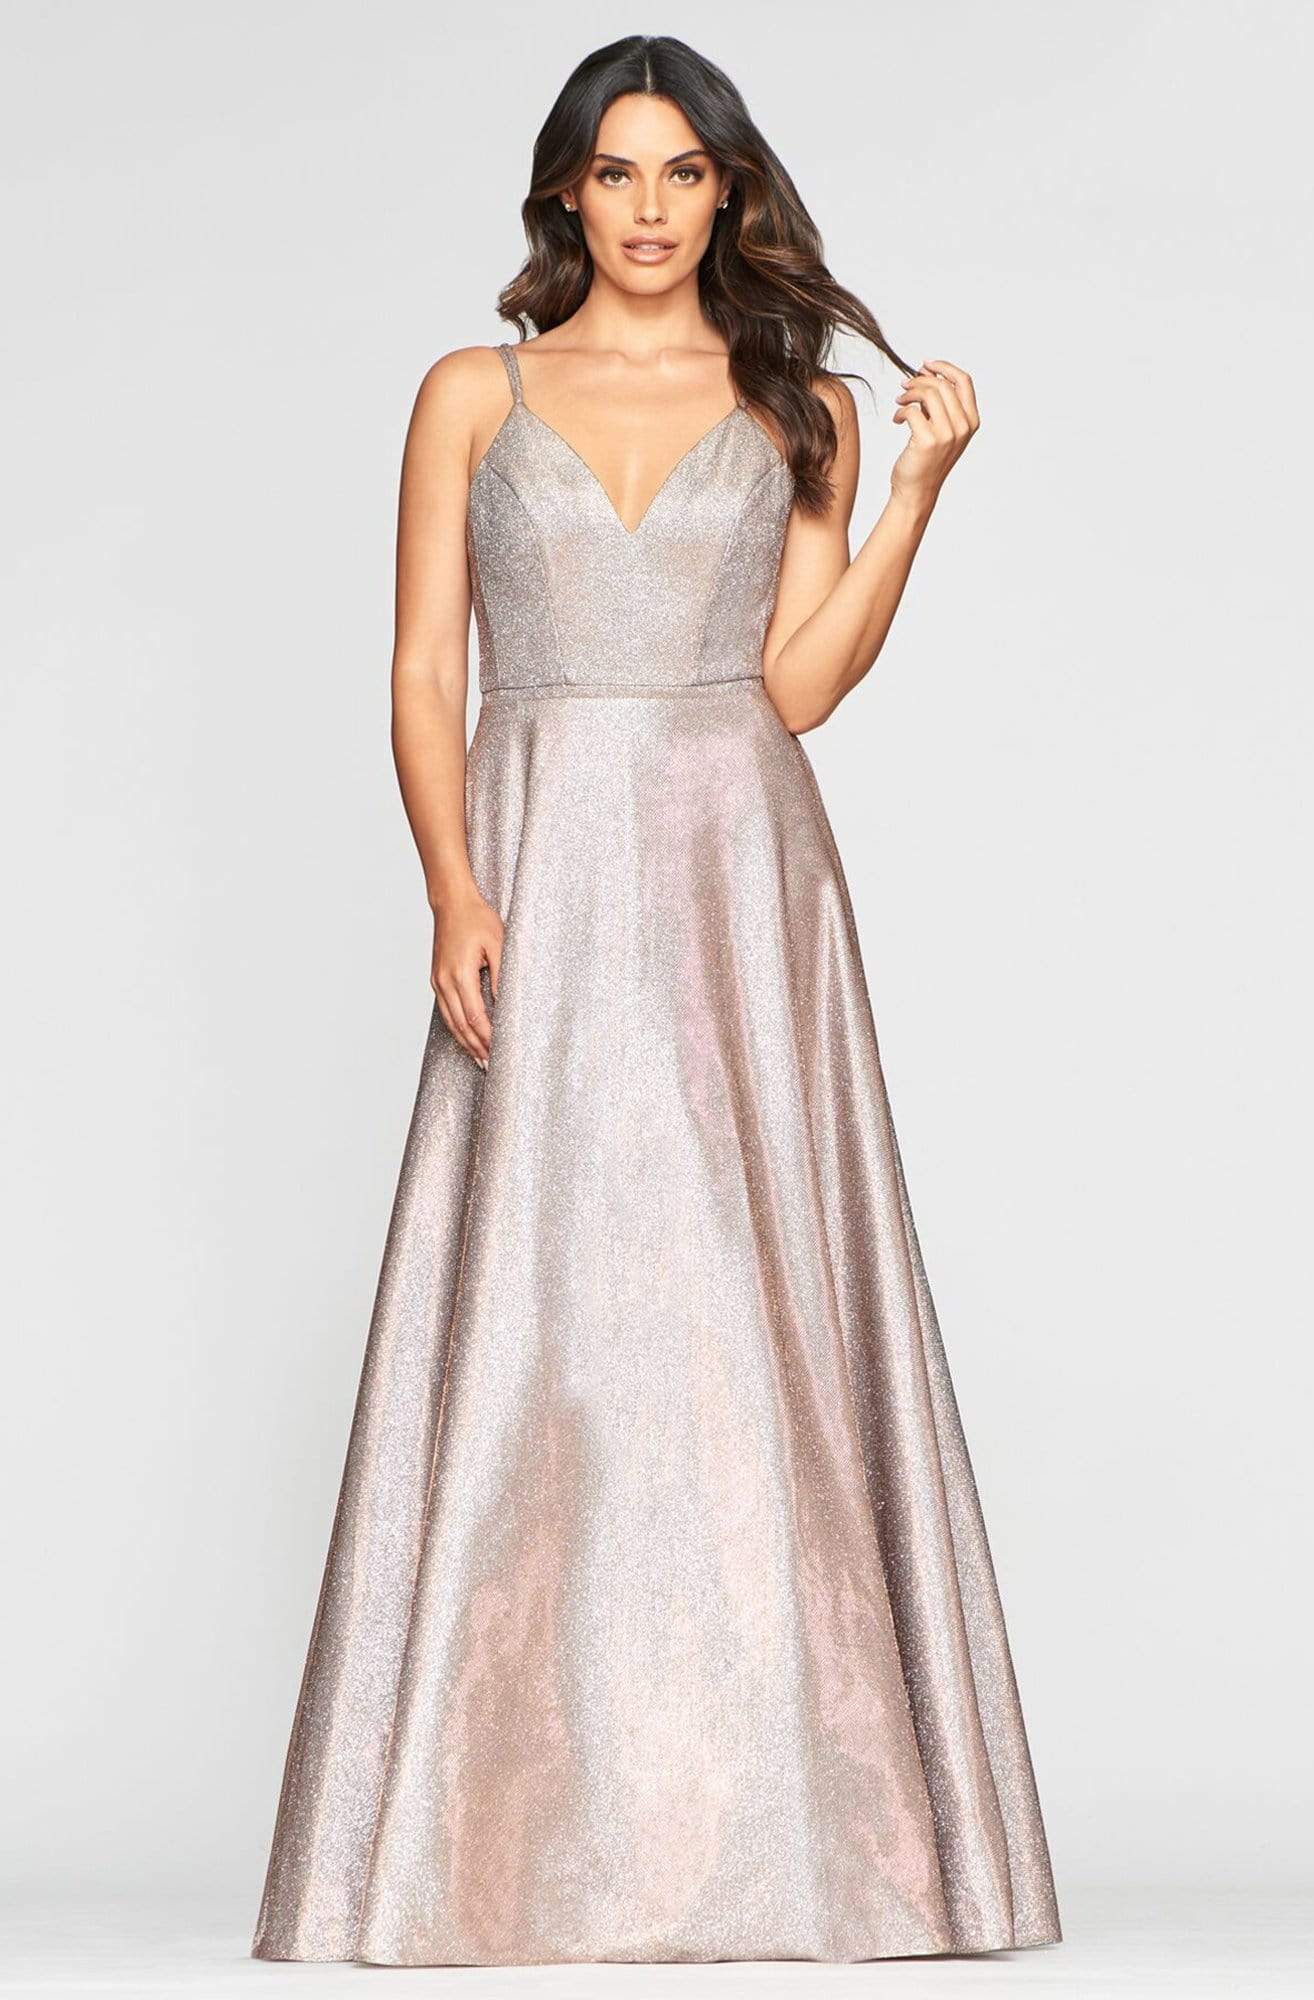 Faviana - S10424 Plunging V-neck Glitter Jersey A-line Gown
